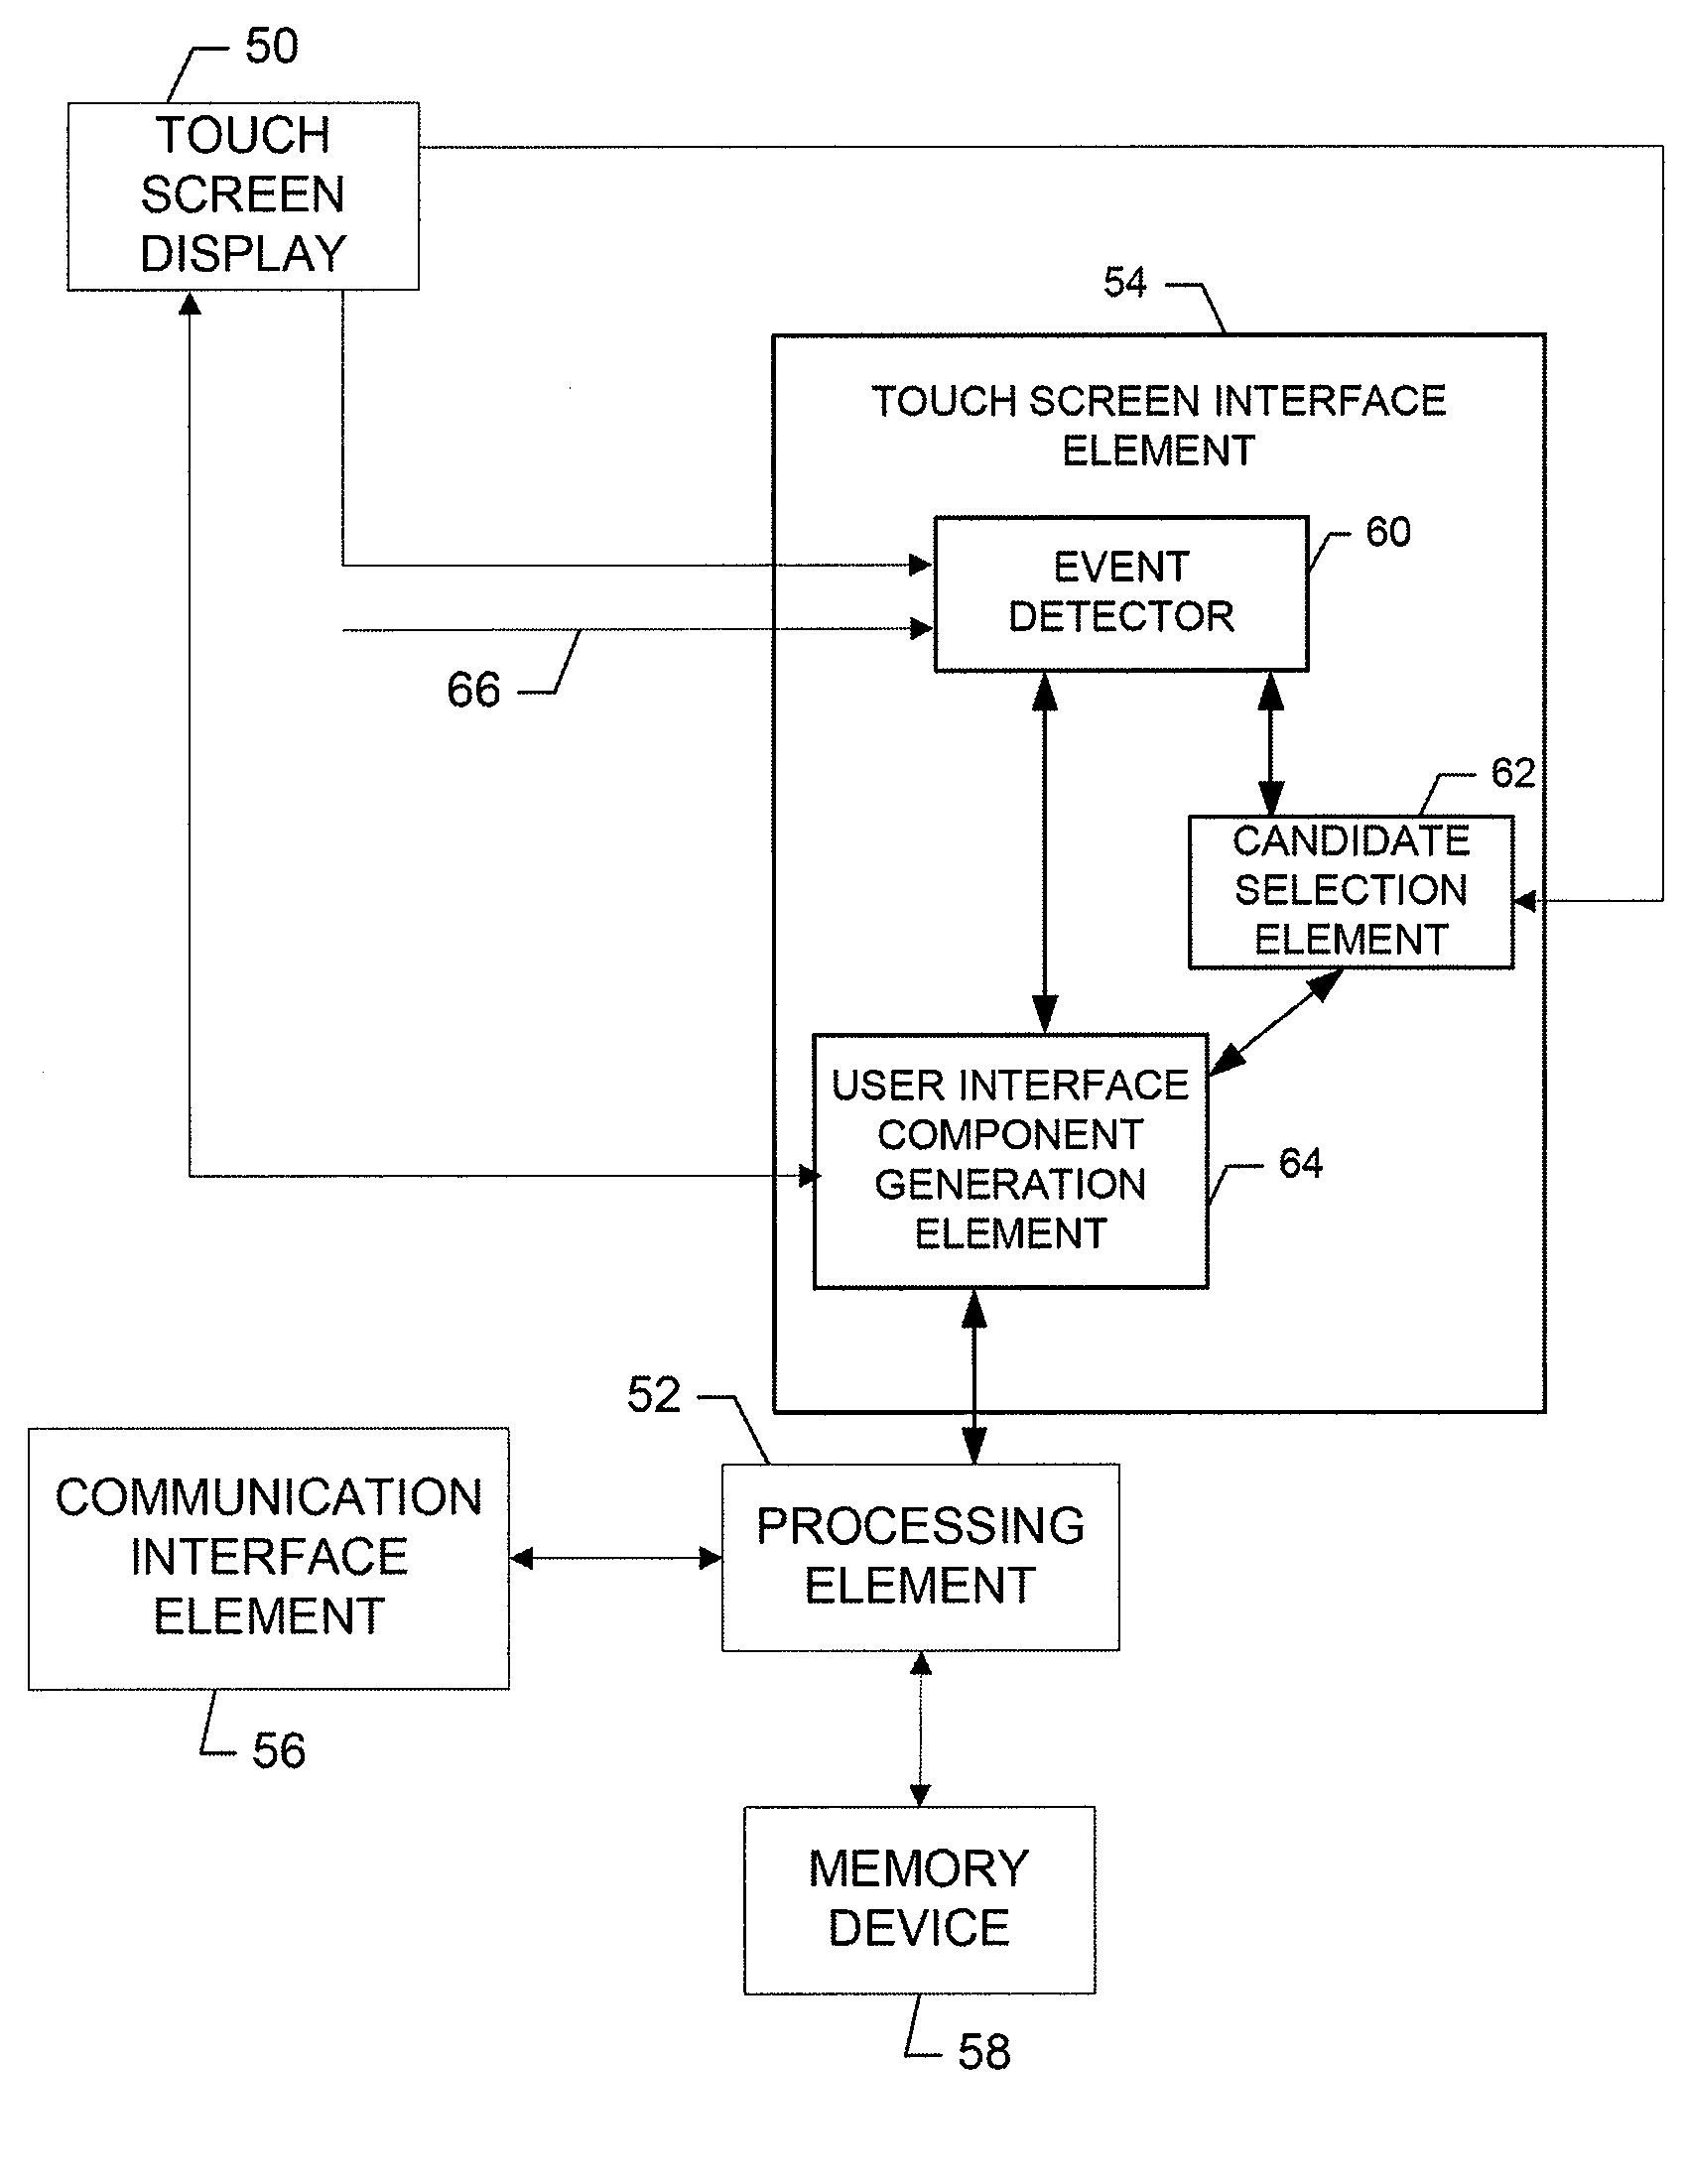 Method, Apparatus and Computer Program Product for Providing an Object Selection Mechanism for Display Devices